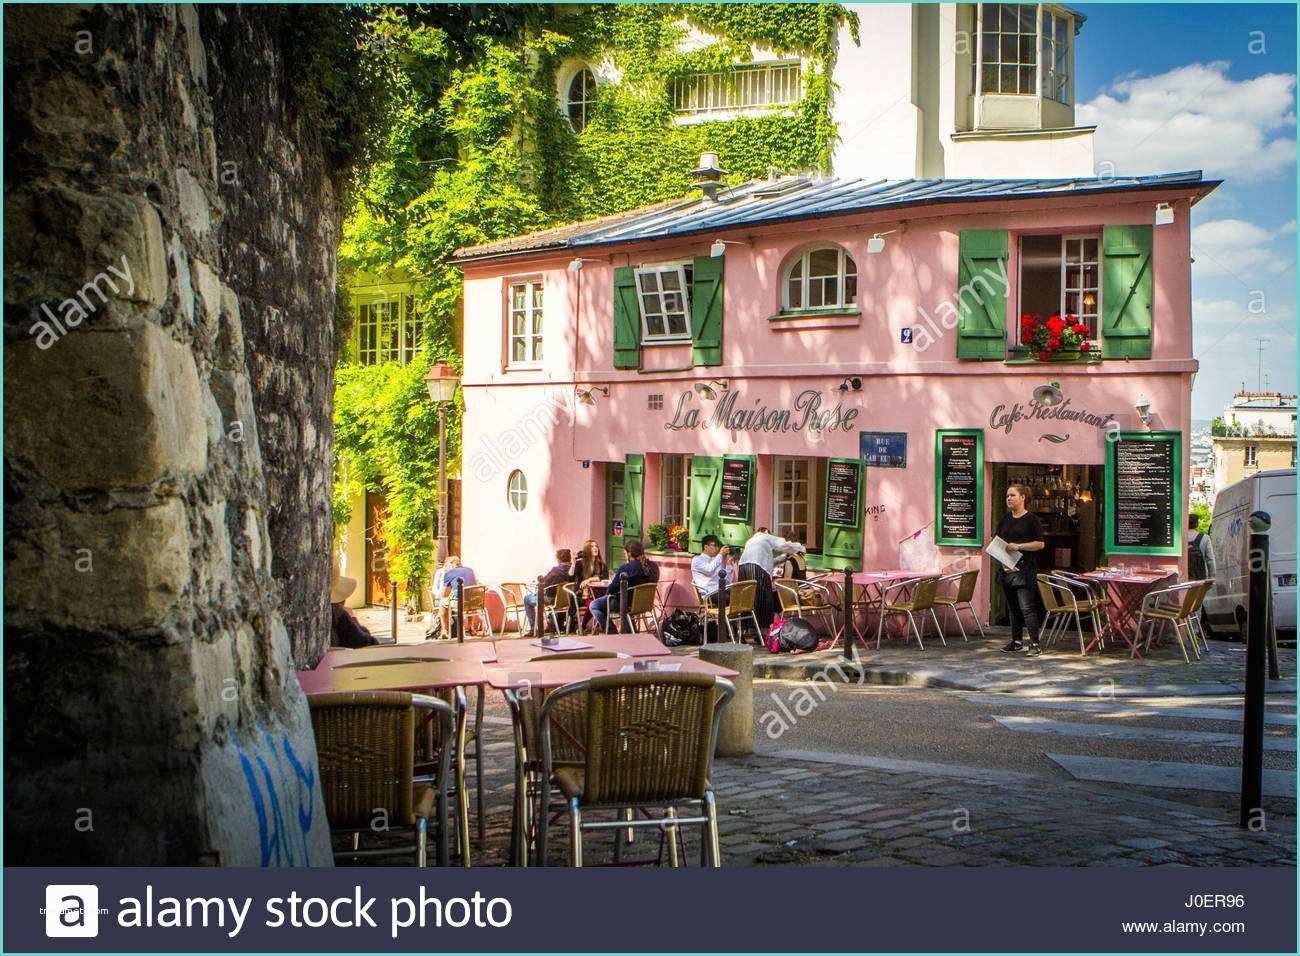 Maison Stock Images La Maison Rose Cafe In the Montmartre Neighborhood Of